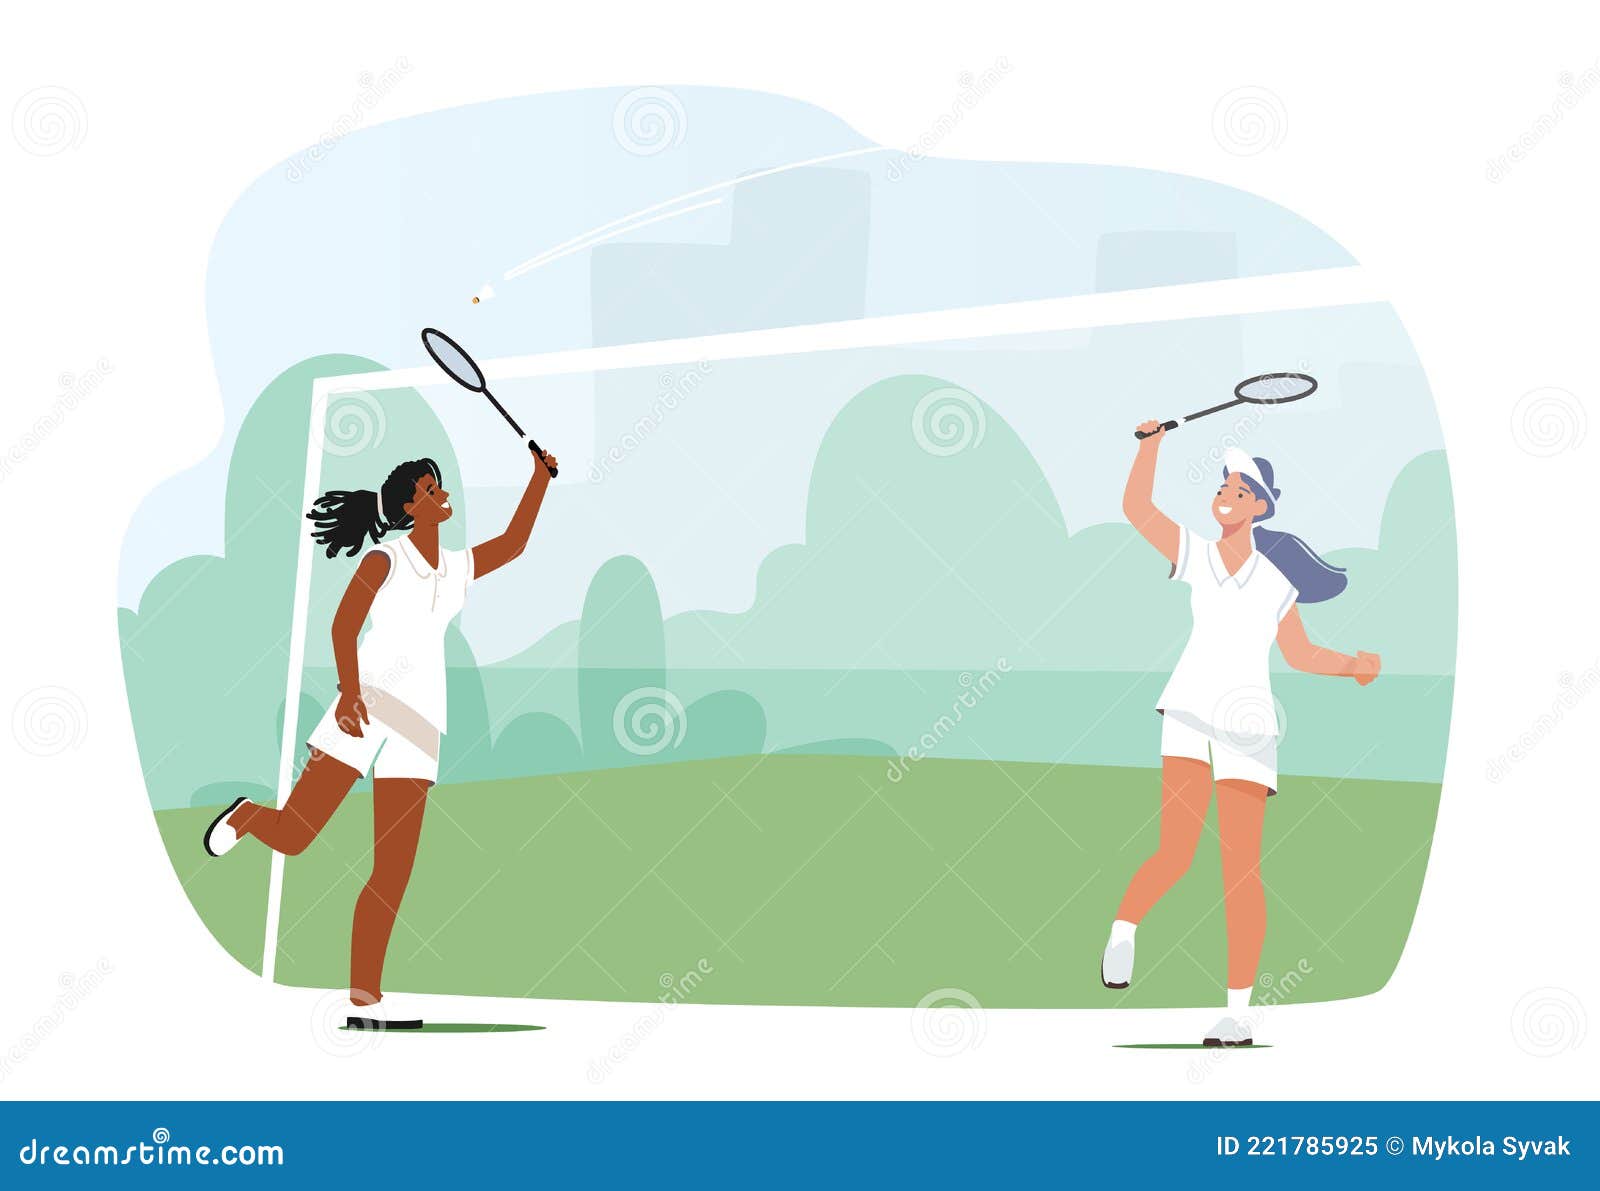 Girls Playing Badminton, Female Players Jumping Get Ready To Smash Shot, Young Women Hit Shuttle with Racket on Court Stock Vector